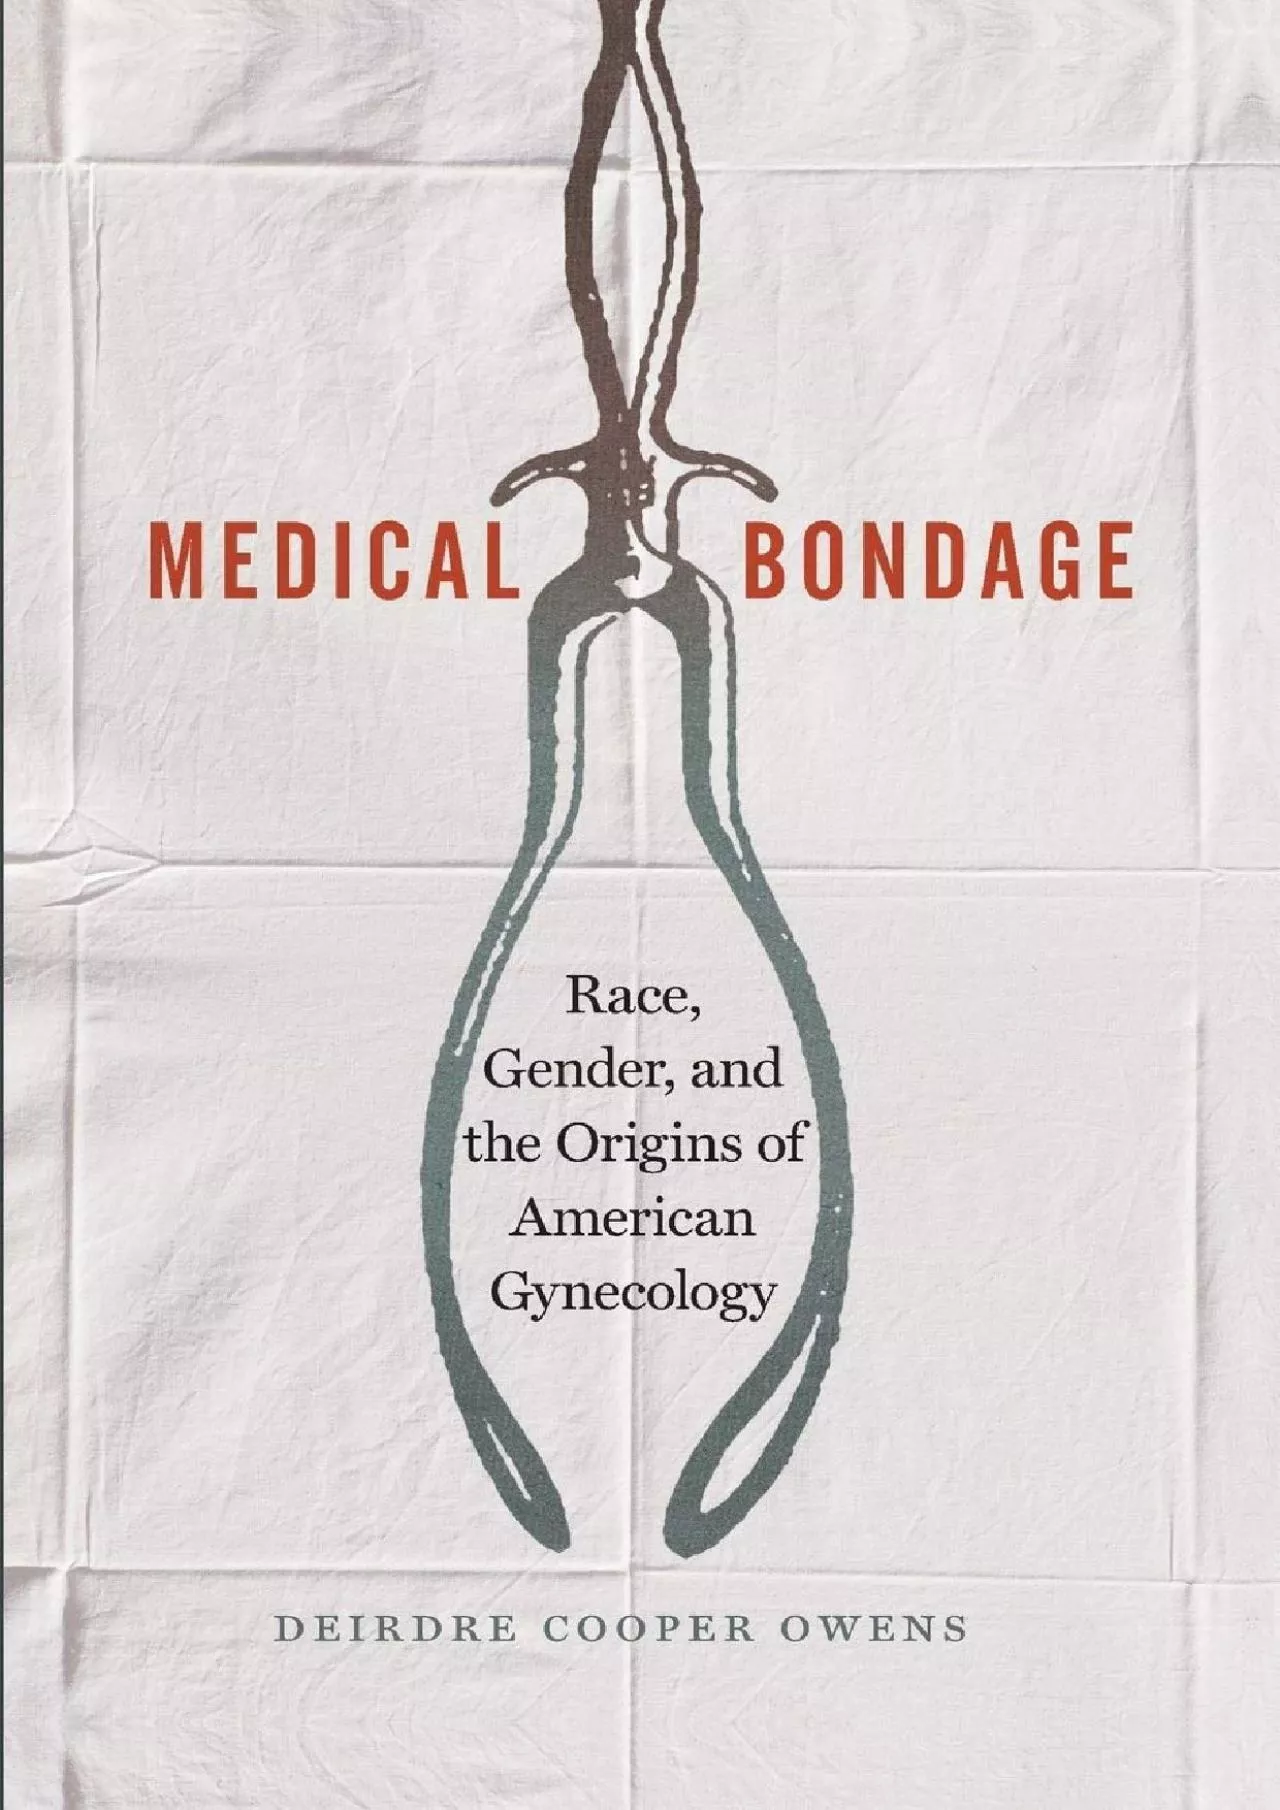 (DOWNLOAD)-Medical Bondage: Race, Gender, and the Origins of American Gynecology